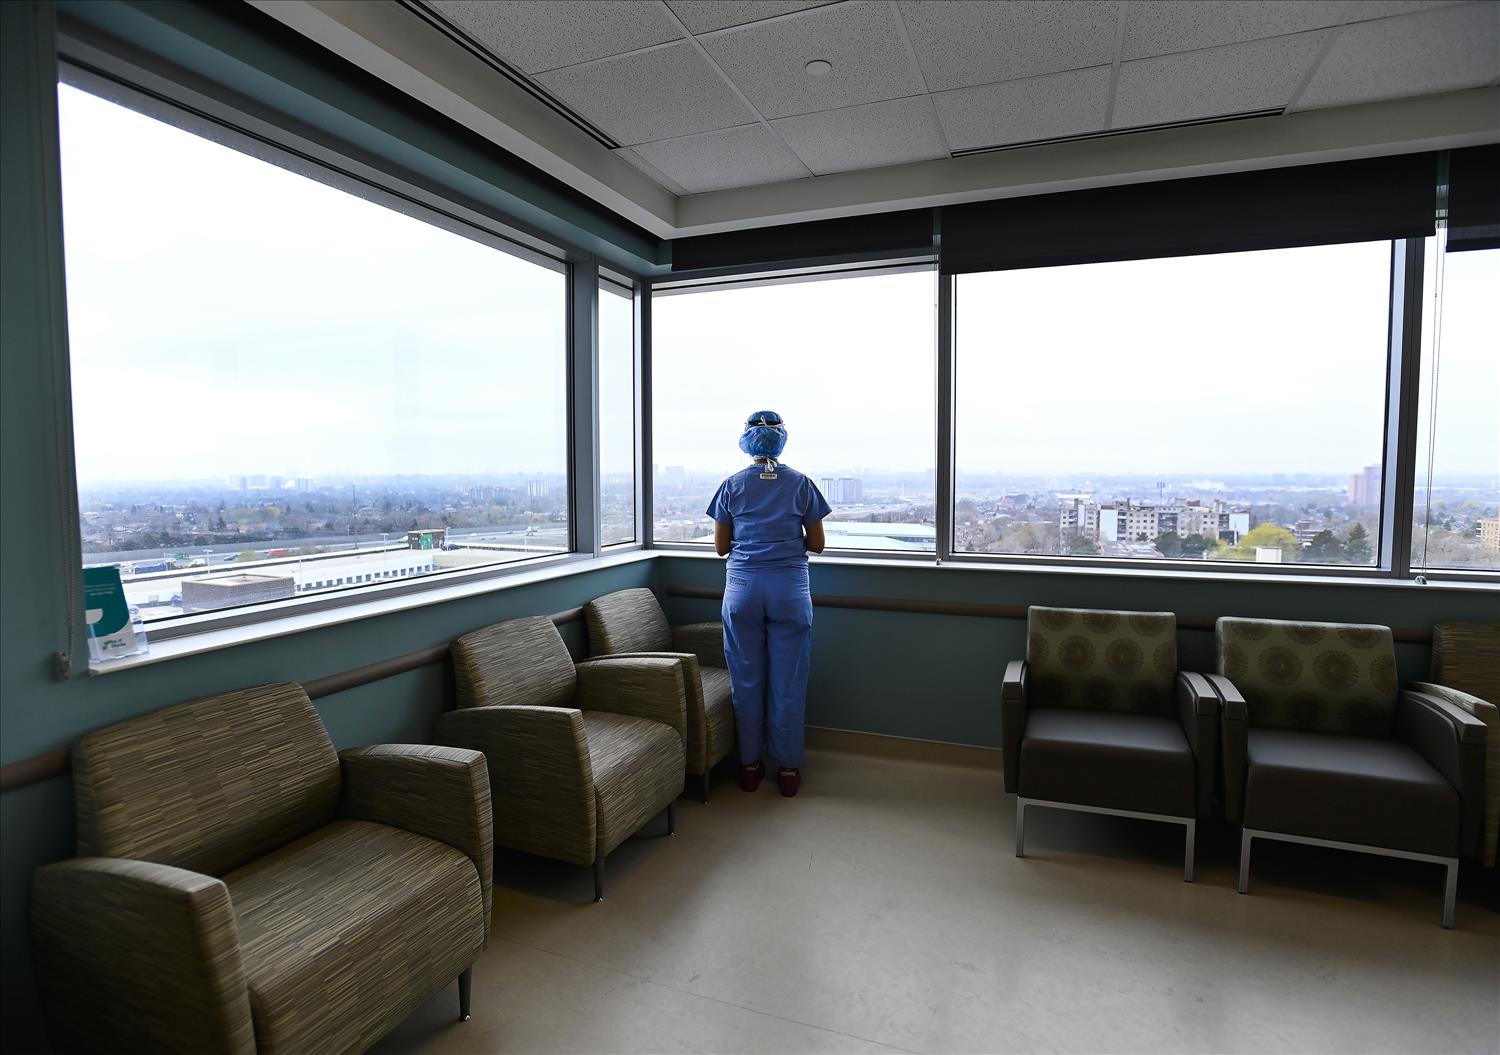 How Health-Care Leaders Can Foster Psychologically Safer Workplaces